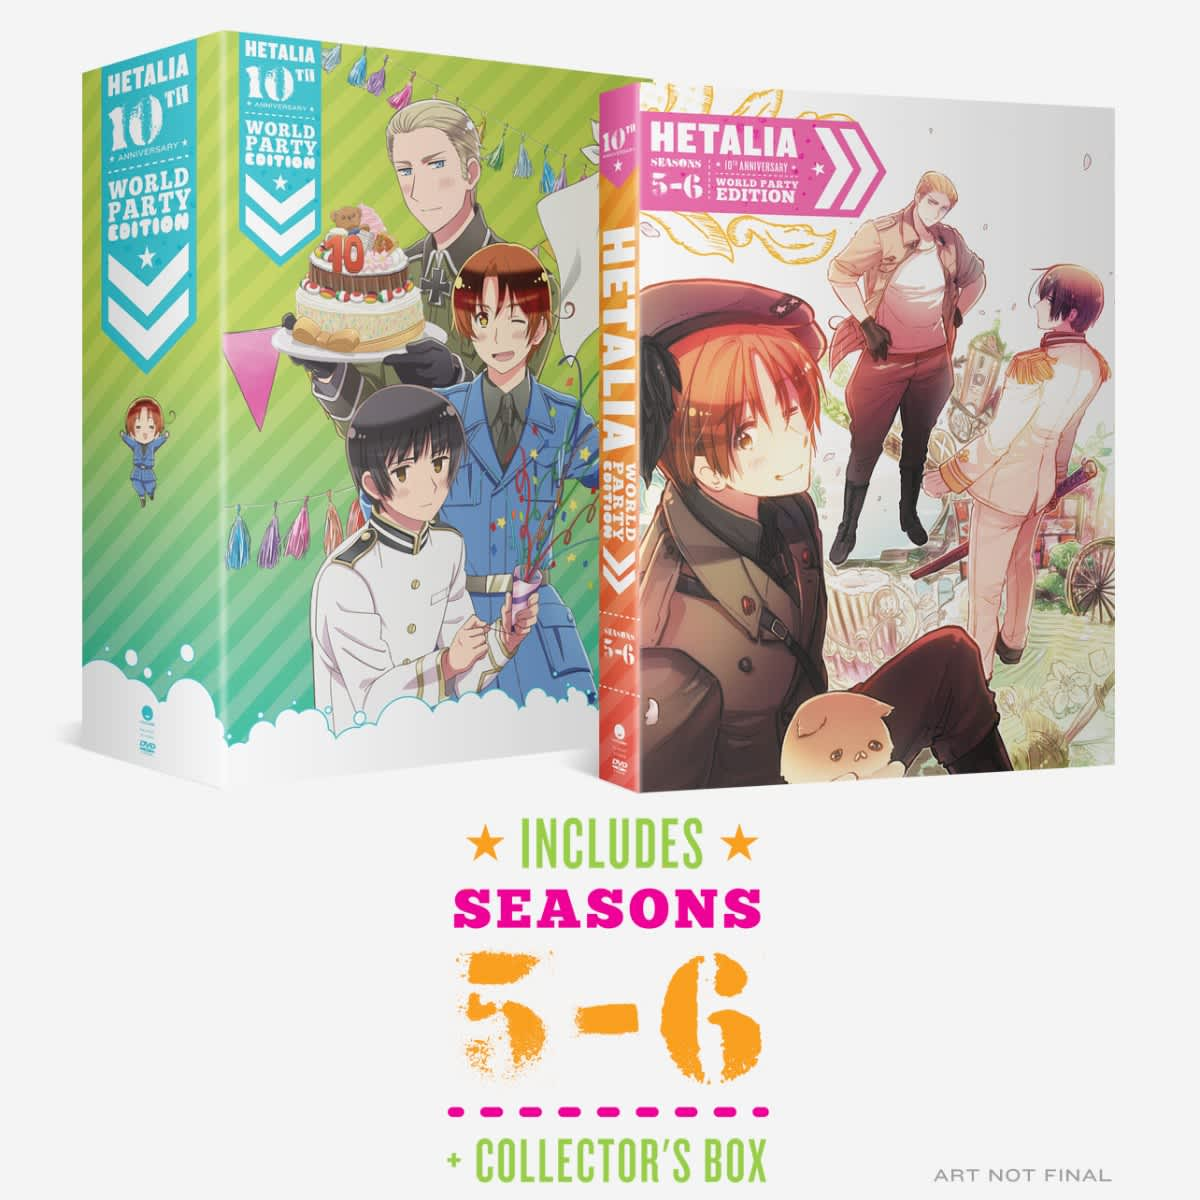 hetalia-10th-anniversary-world-party-collection-2-seasons-five-and-six-dvd_fun-digital_2.png